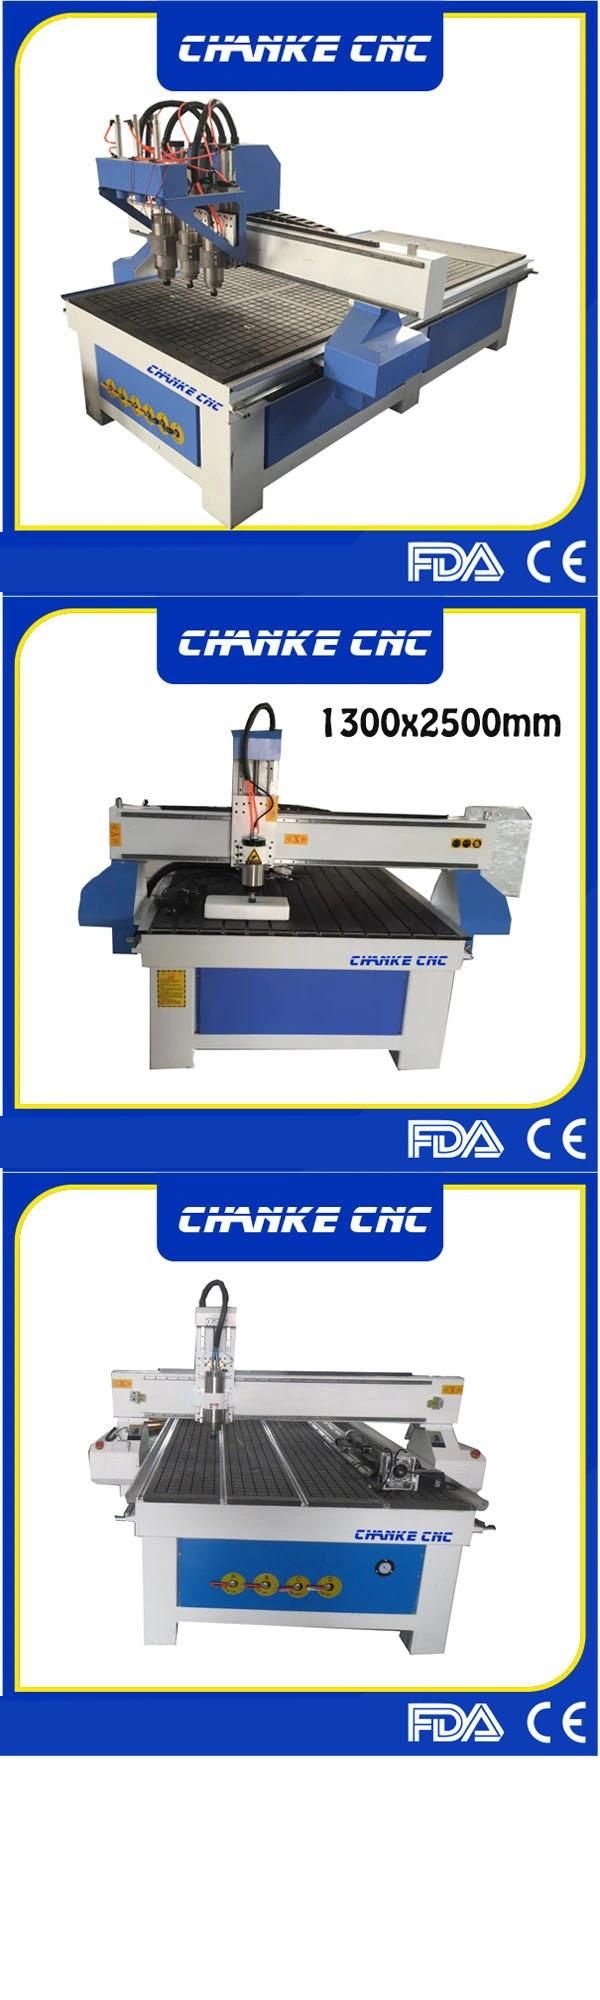 High Quality Woodworking Engraving Cutting CNC Router Machine